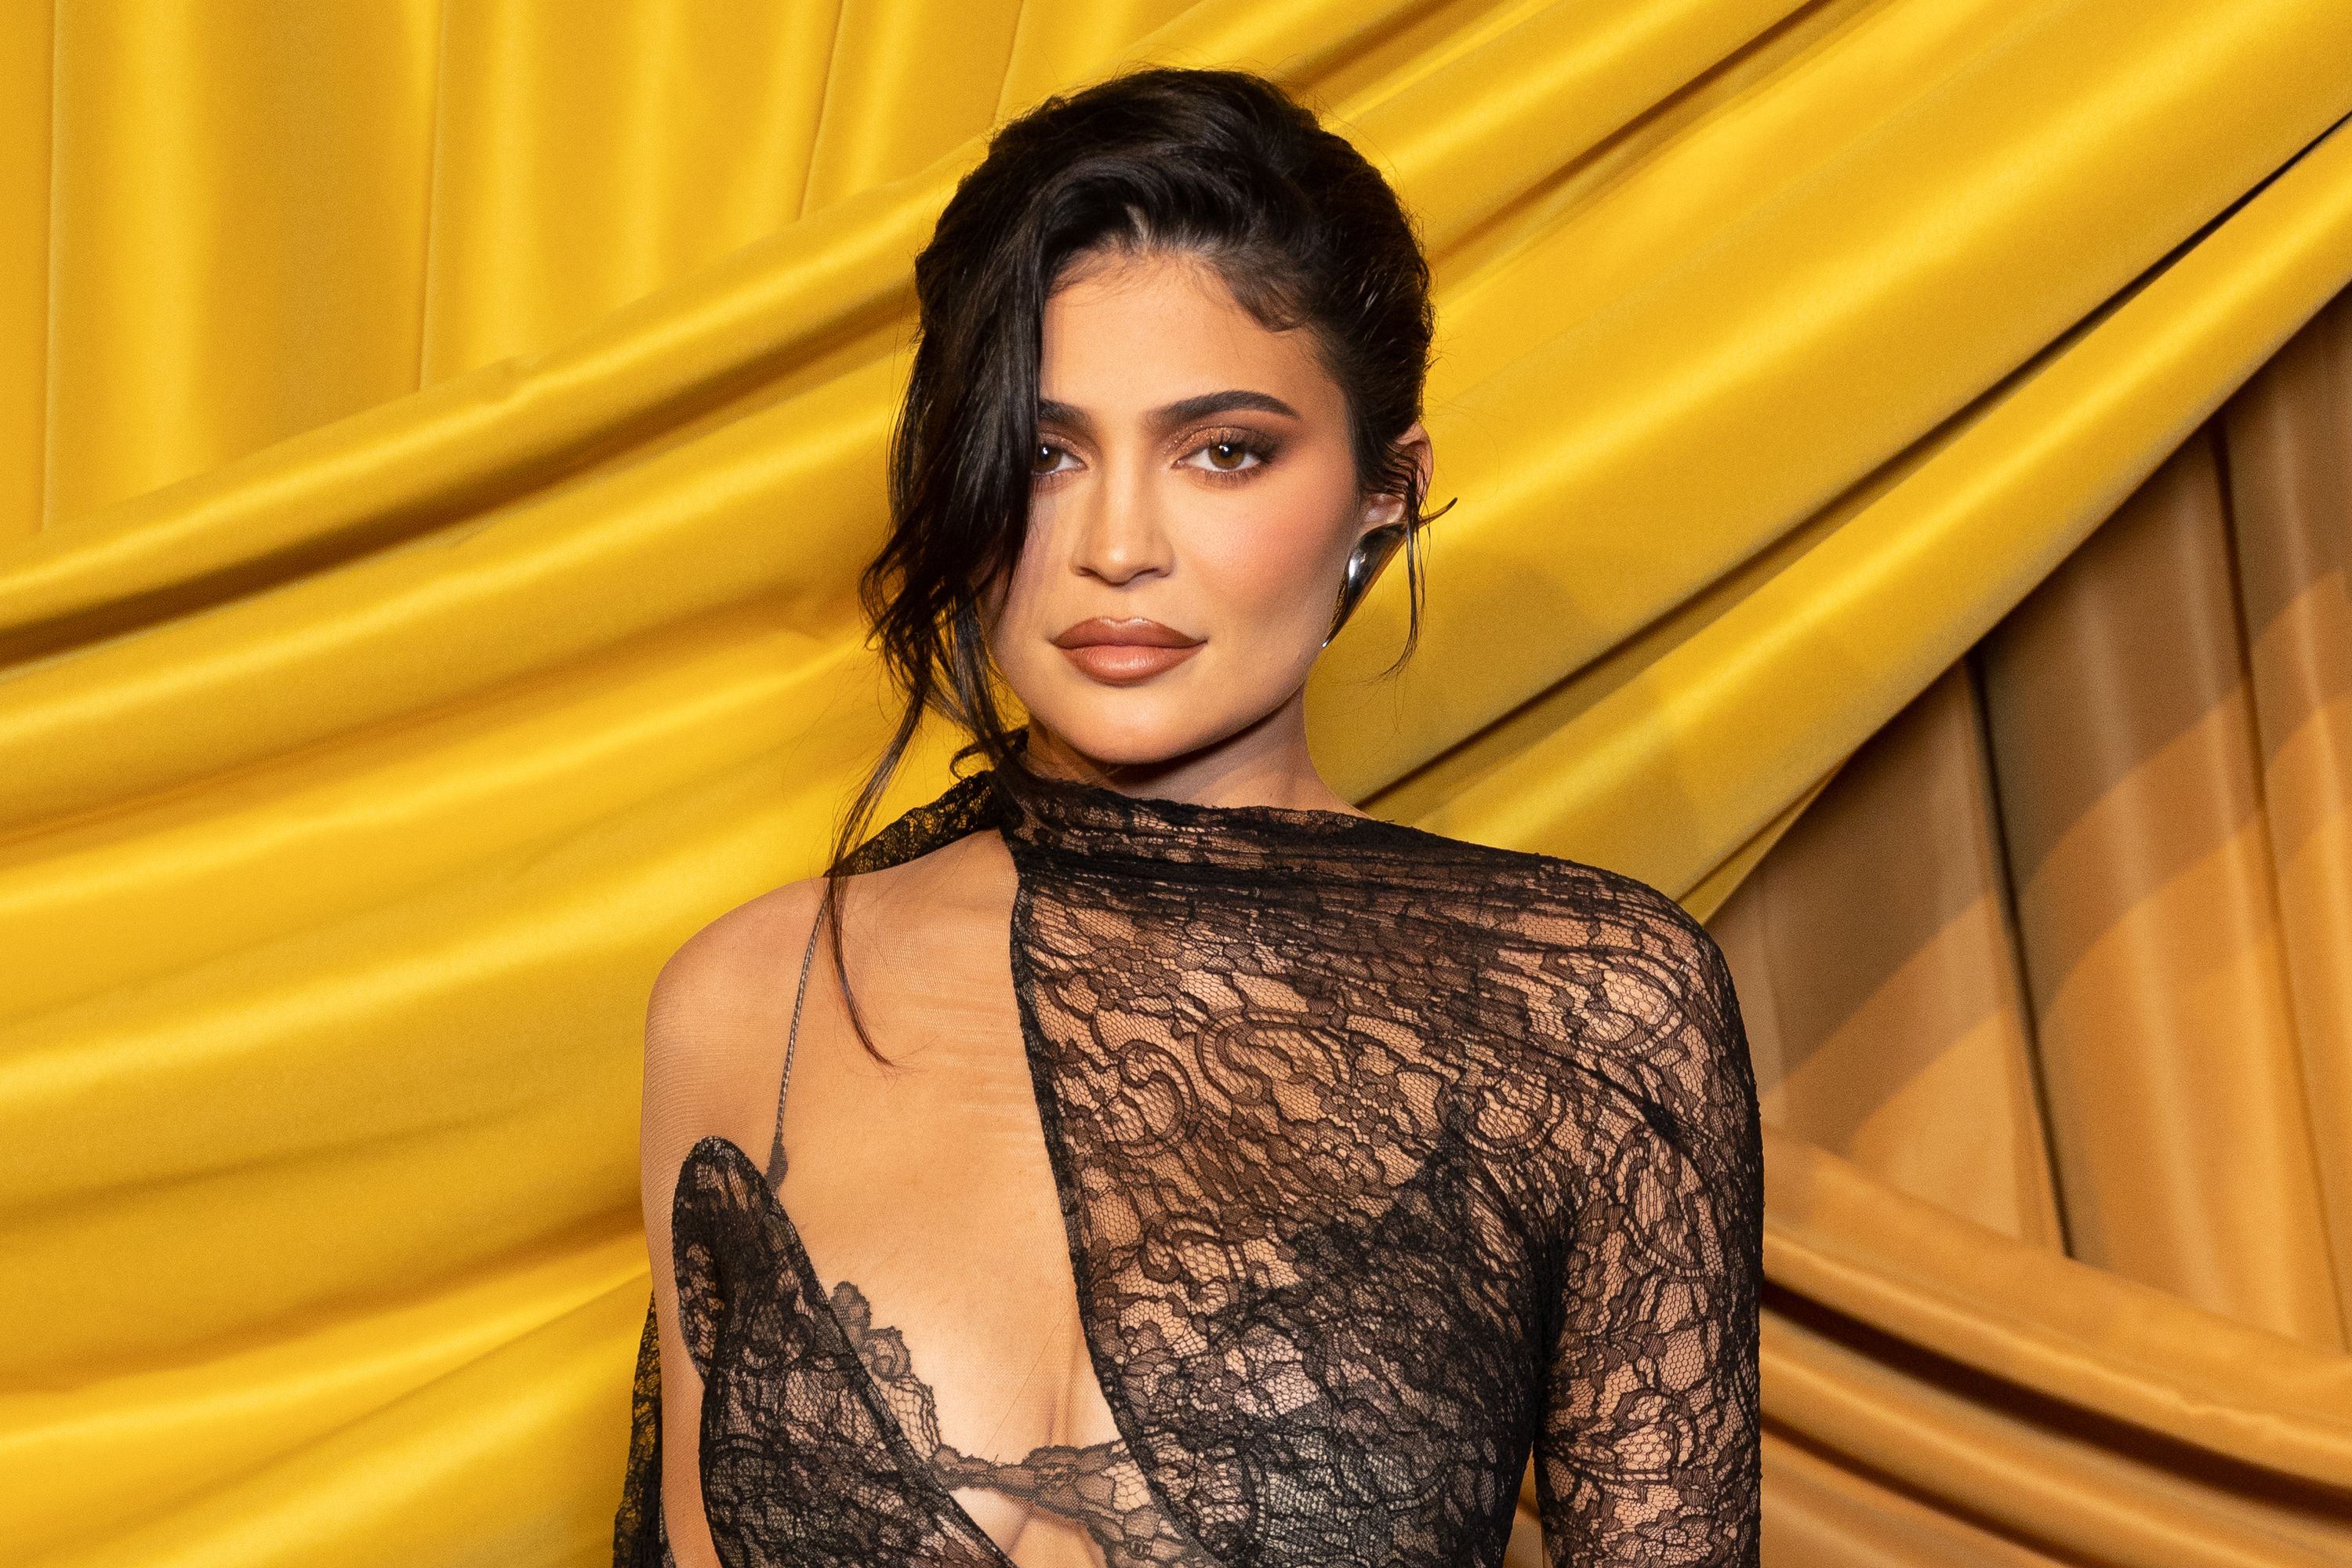 Kylie Jenner Discusses Her New Kylie Cosmetics Matte And Créme Lipsticks